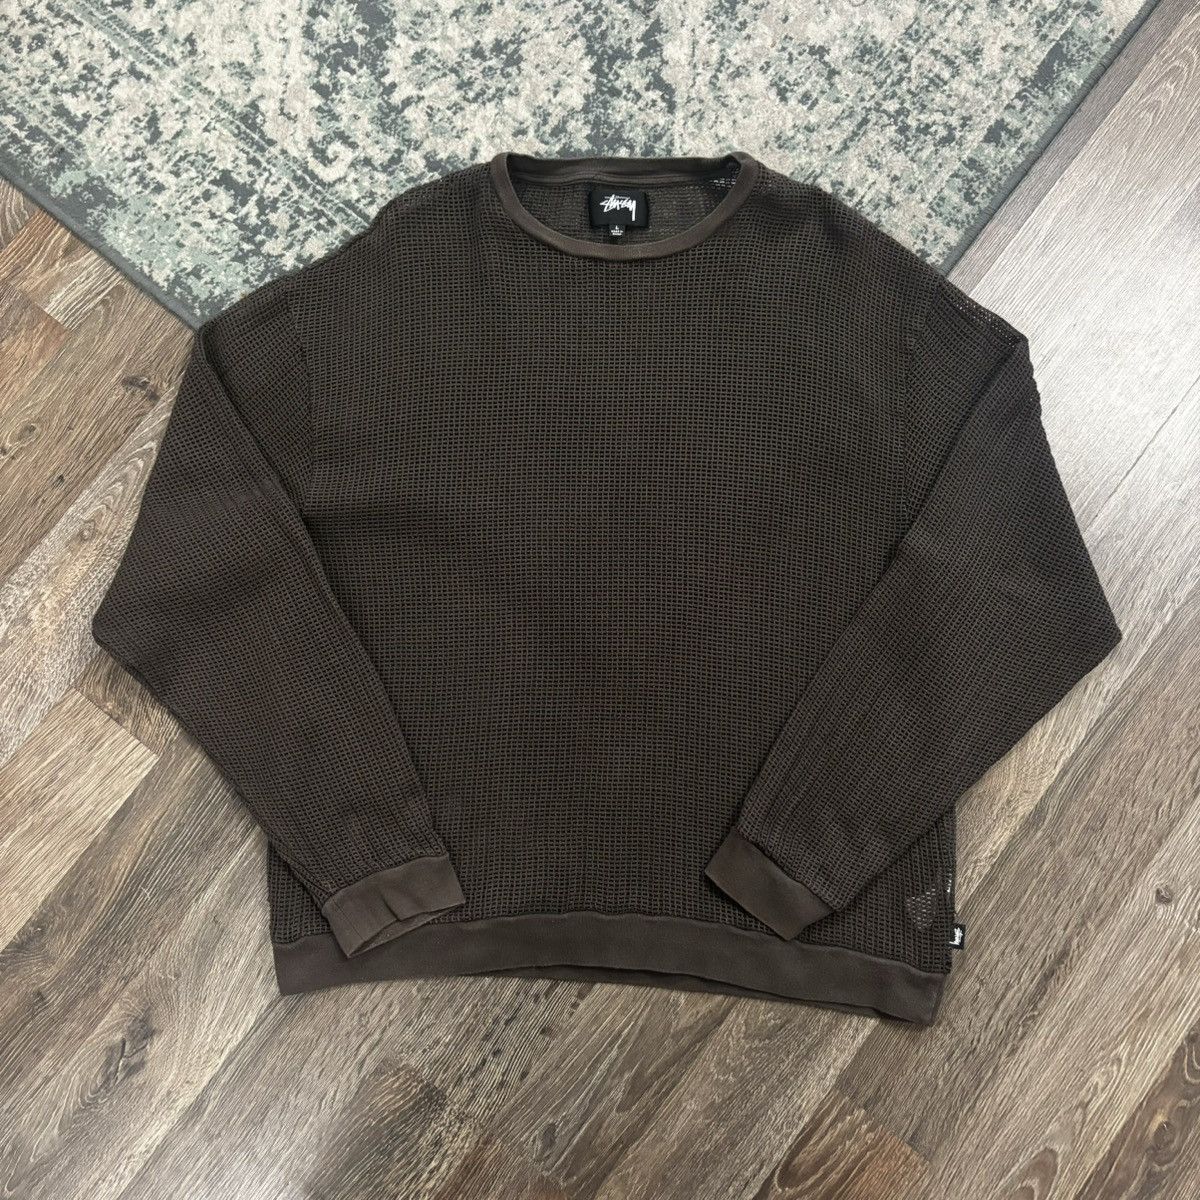 Stussy Stussy cotton mesh knit sweater | Grailed